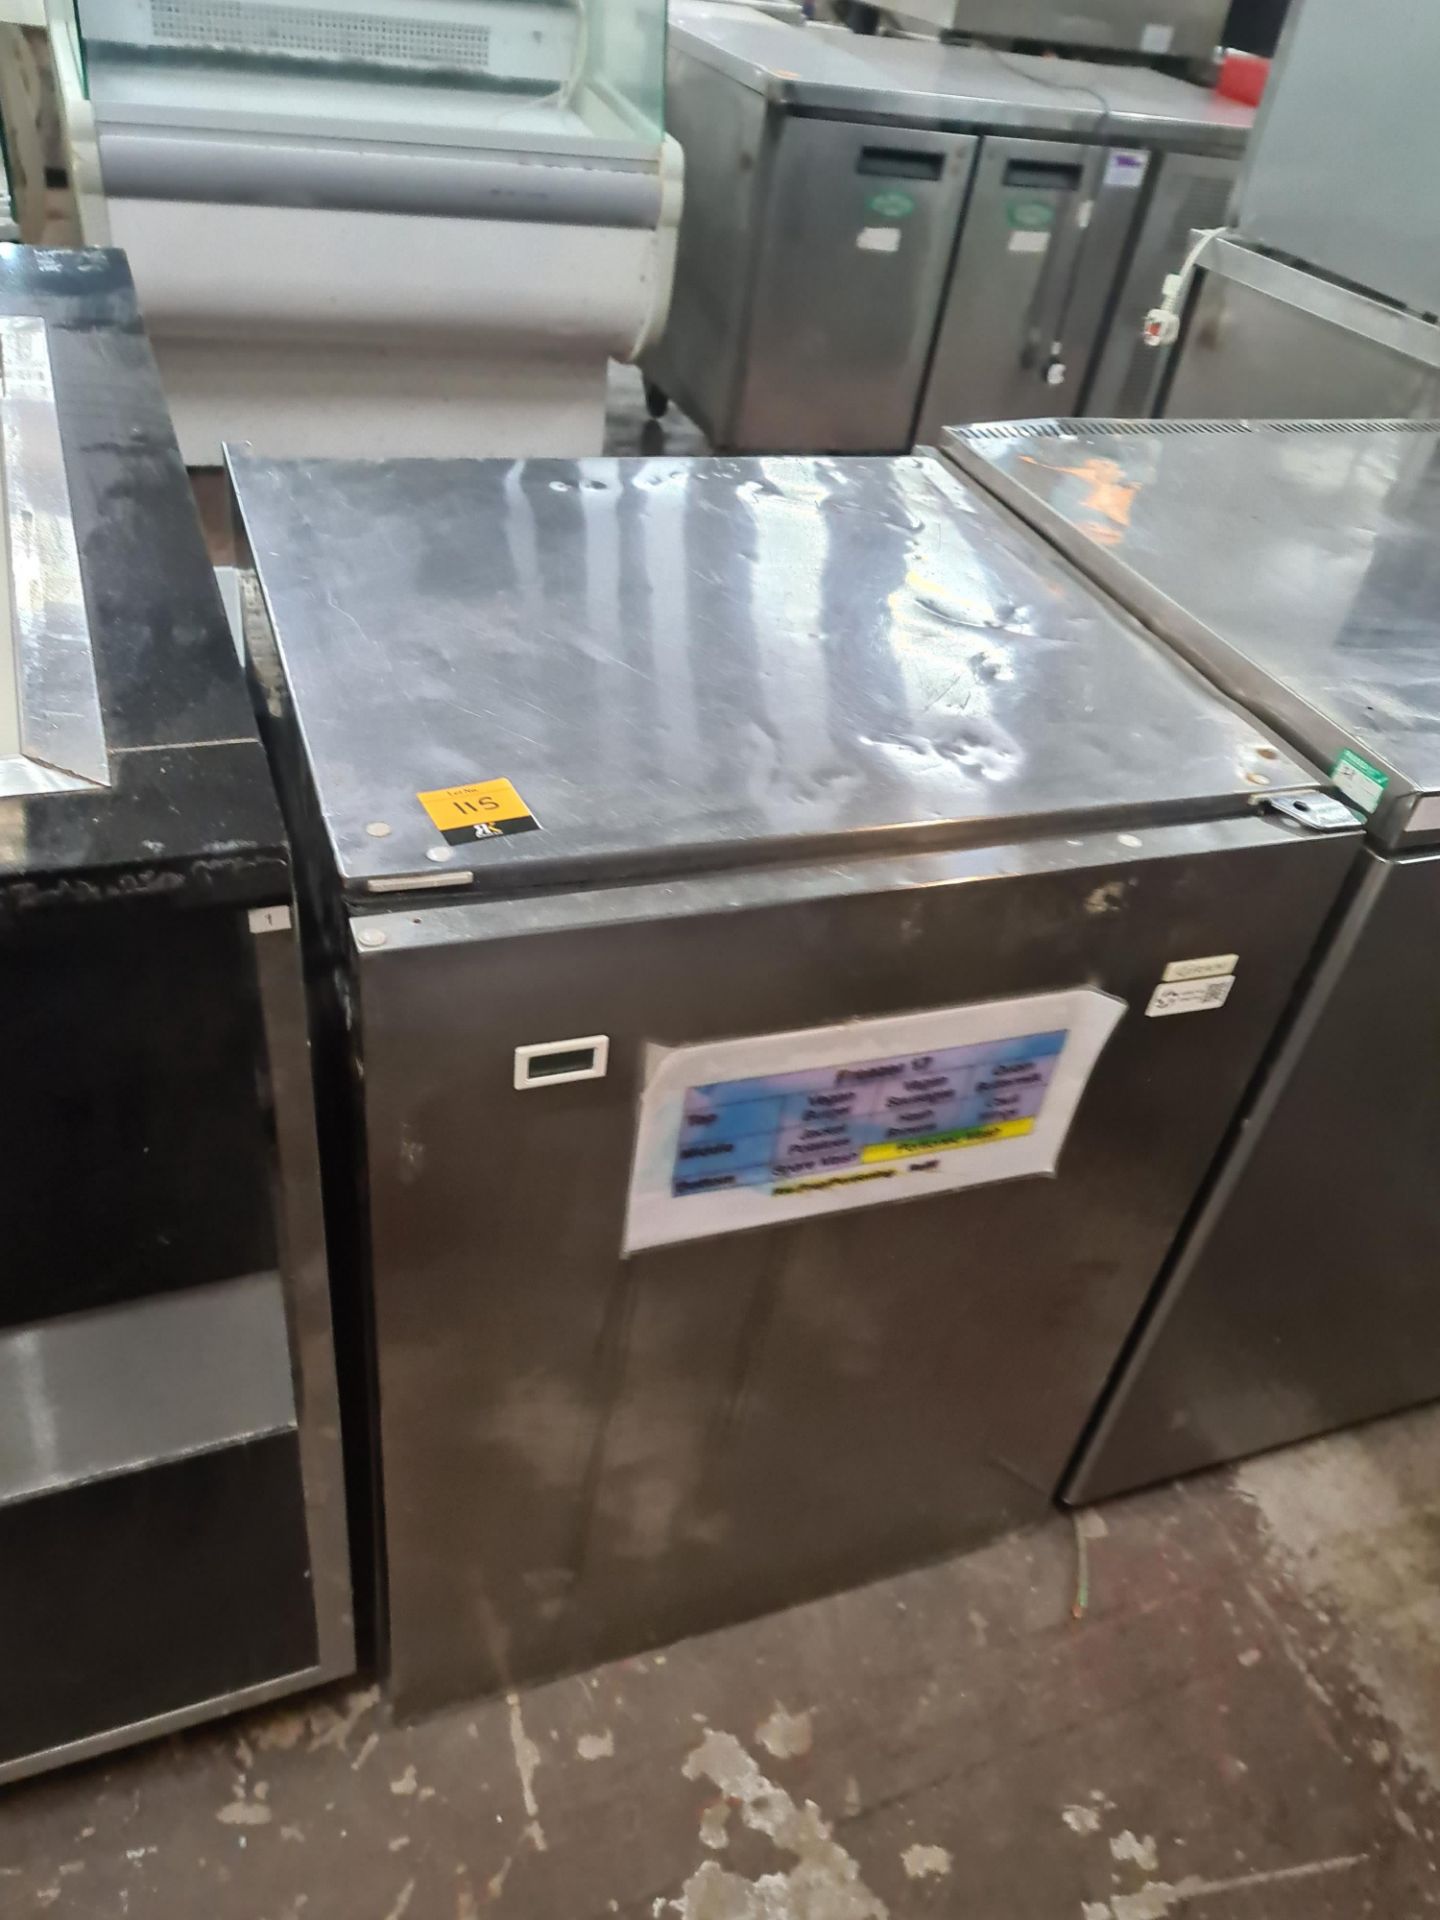 Gram stainless steel under counter freezer, model F150GB - Image 4 of 6